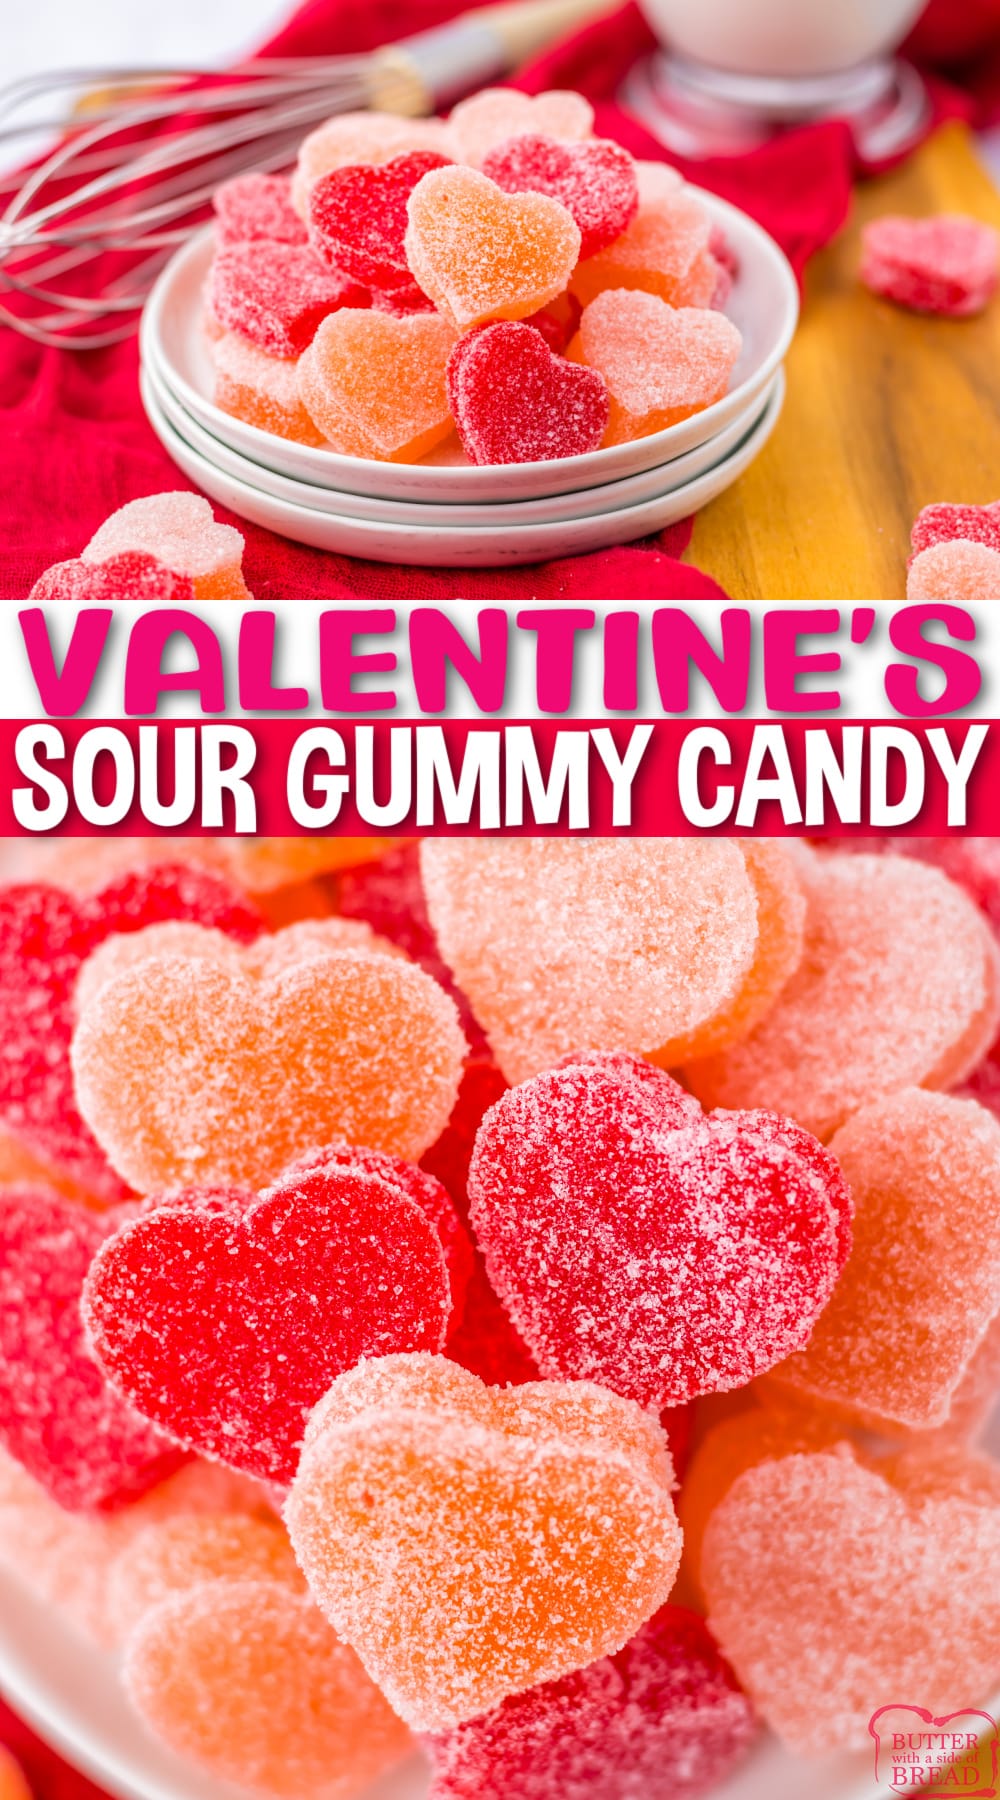 Valentine's Sour Gummy Candy is festive and delicious. Flavored gummy candy hearts that are coated in a sweet and sour mix. 